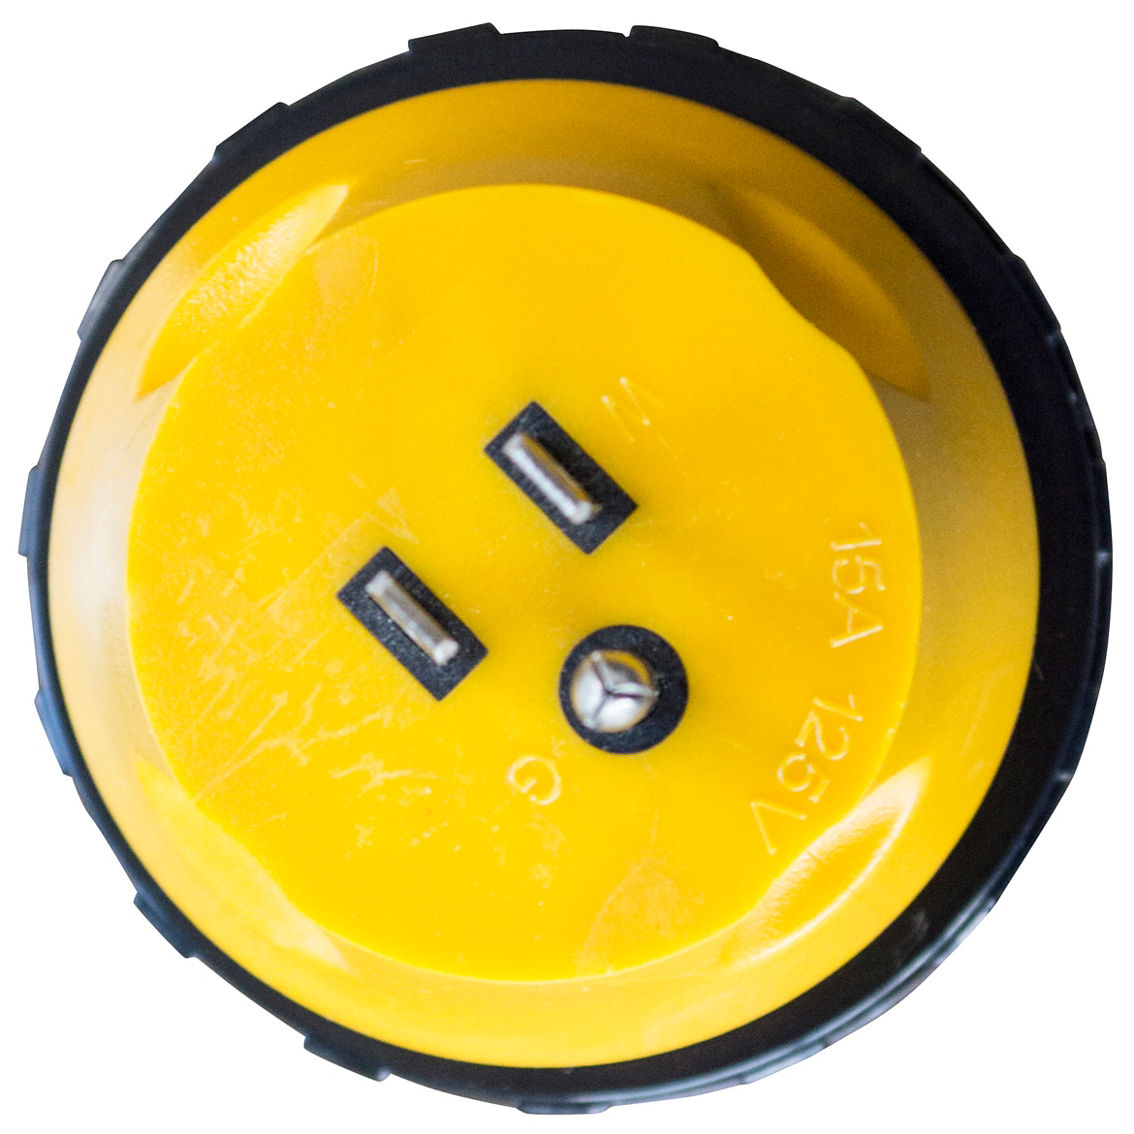 Sportsman Series 5-15P 15 Amp Male to L5-30R 30 Amp Female Conversion Adapter Plug - Image 3 of 7